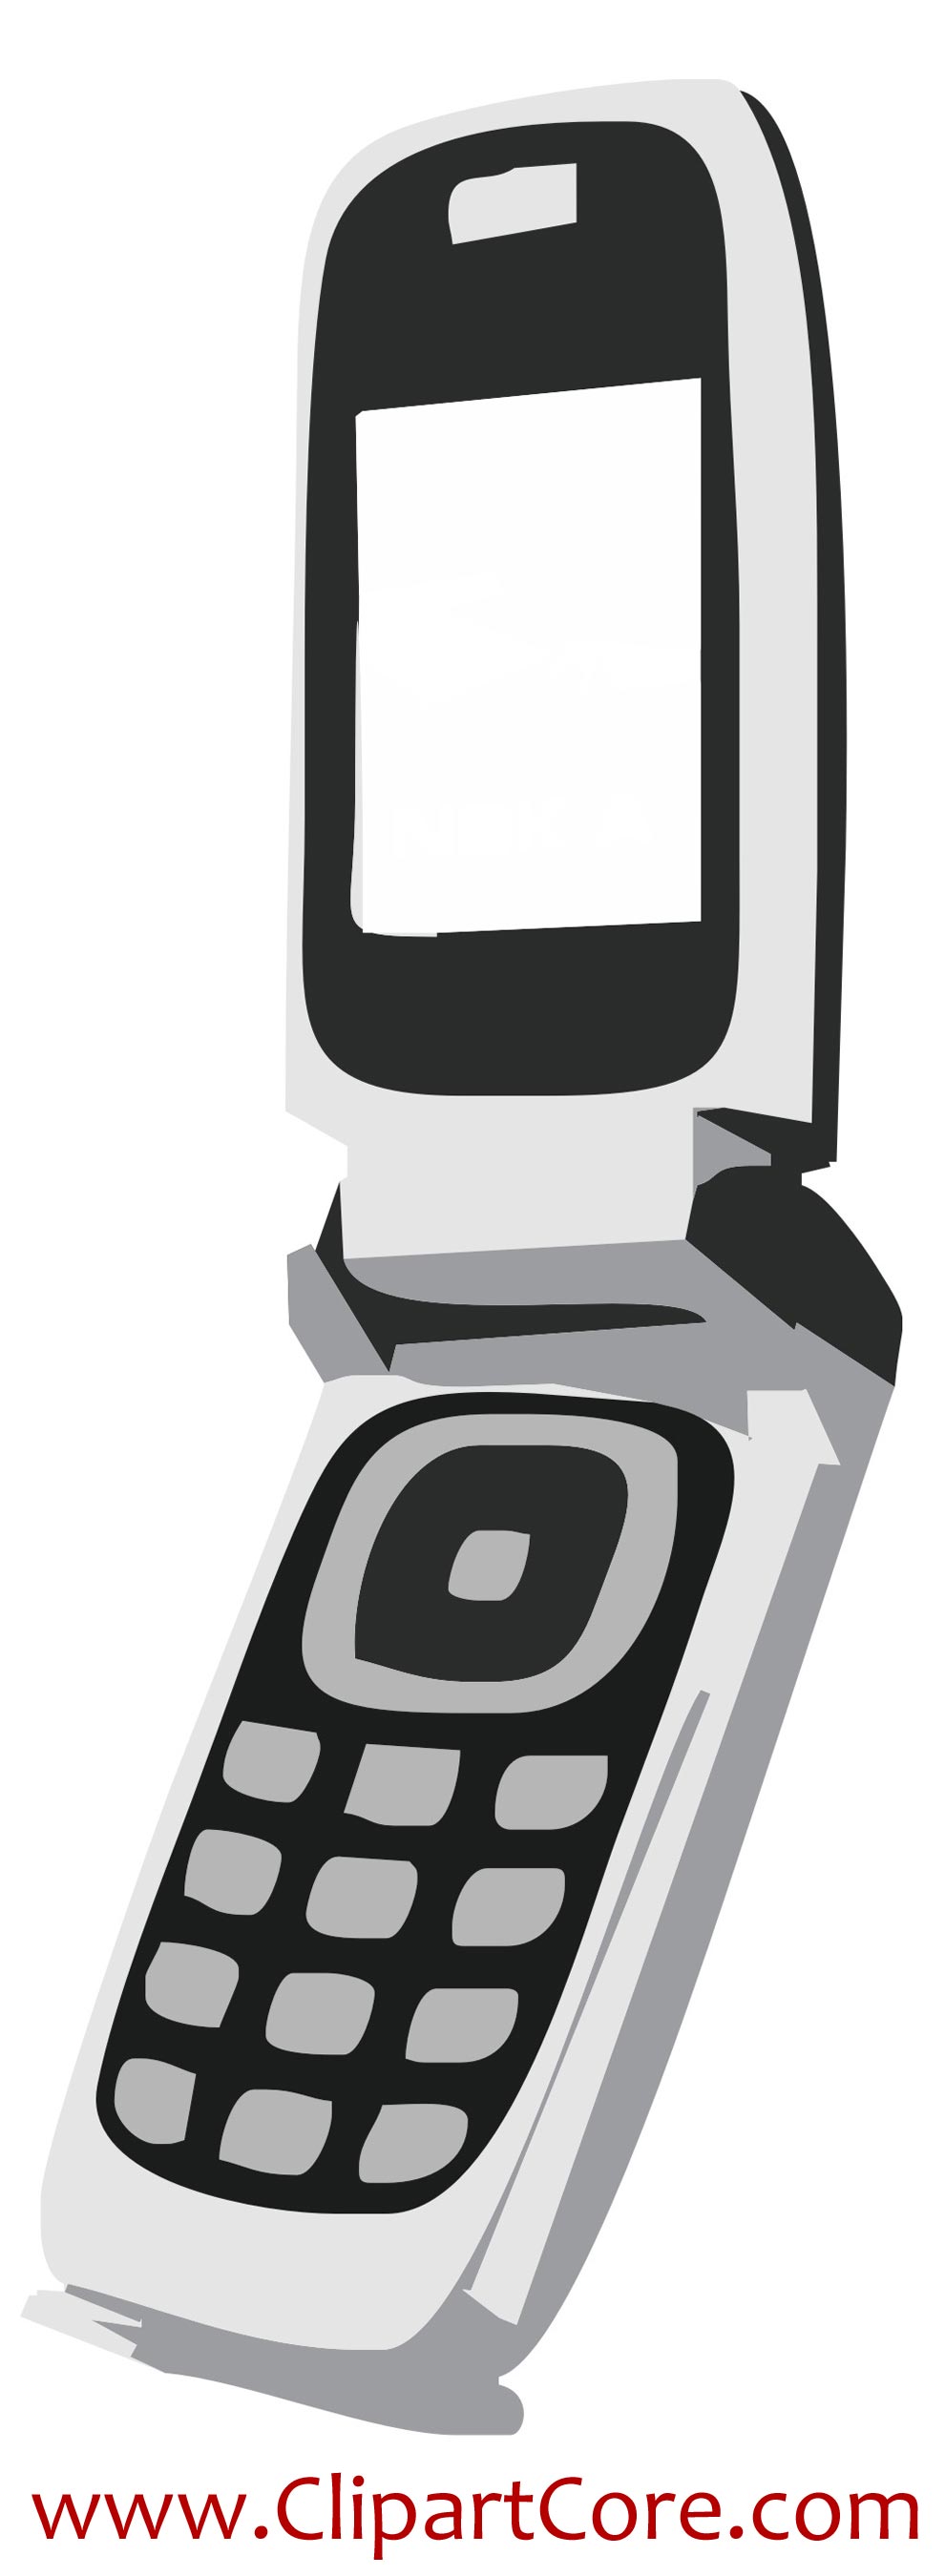 cell phone clipart - photo #37